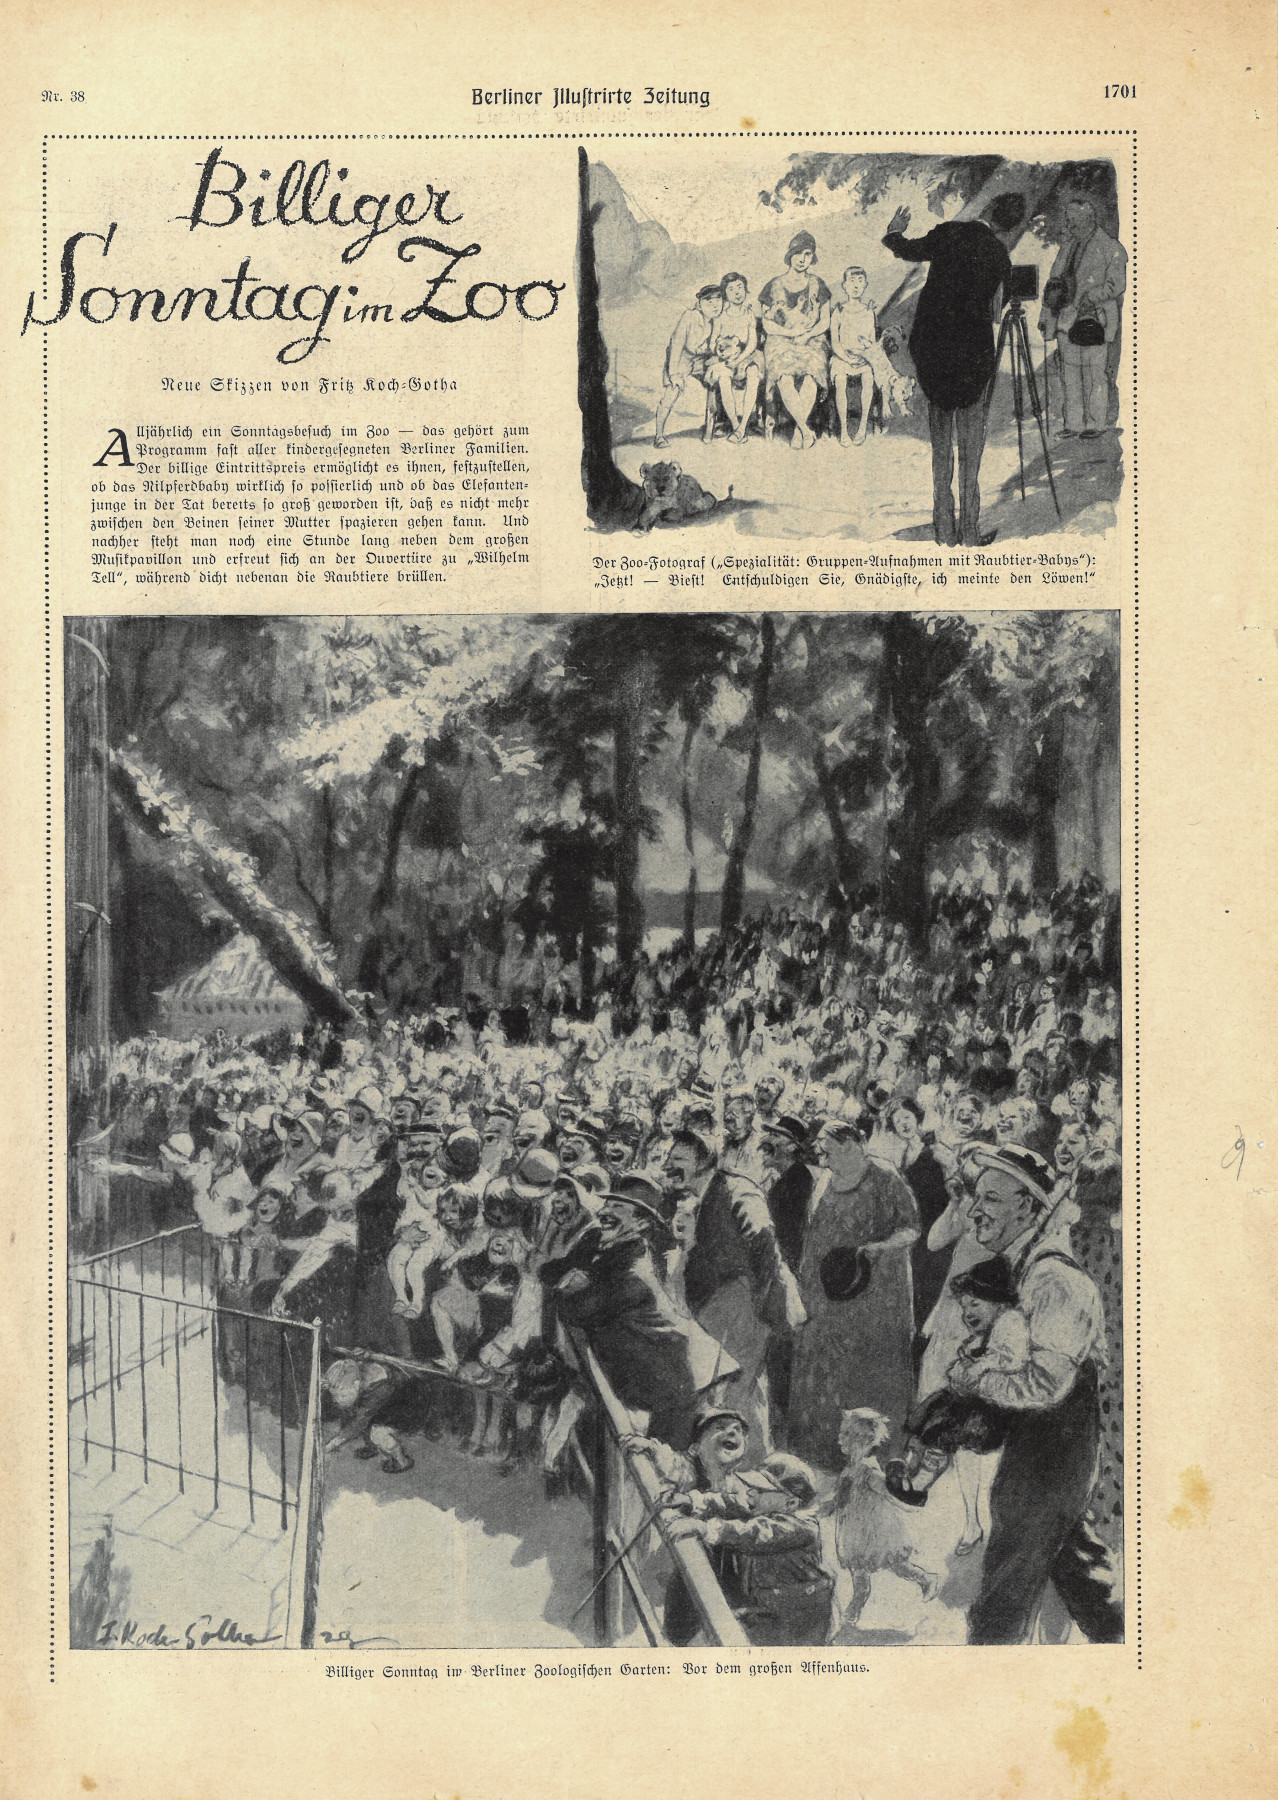 Newspaper. Title: Cheap Sundays at the zoo. Small illustration, top right: a photographer shoots a family with three lion cubs on their laps. Large illustration, bottom: smiling masses in front of a railing.